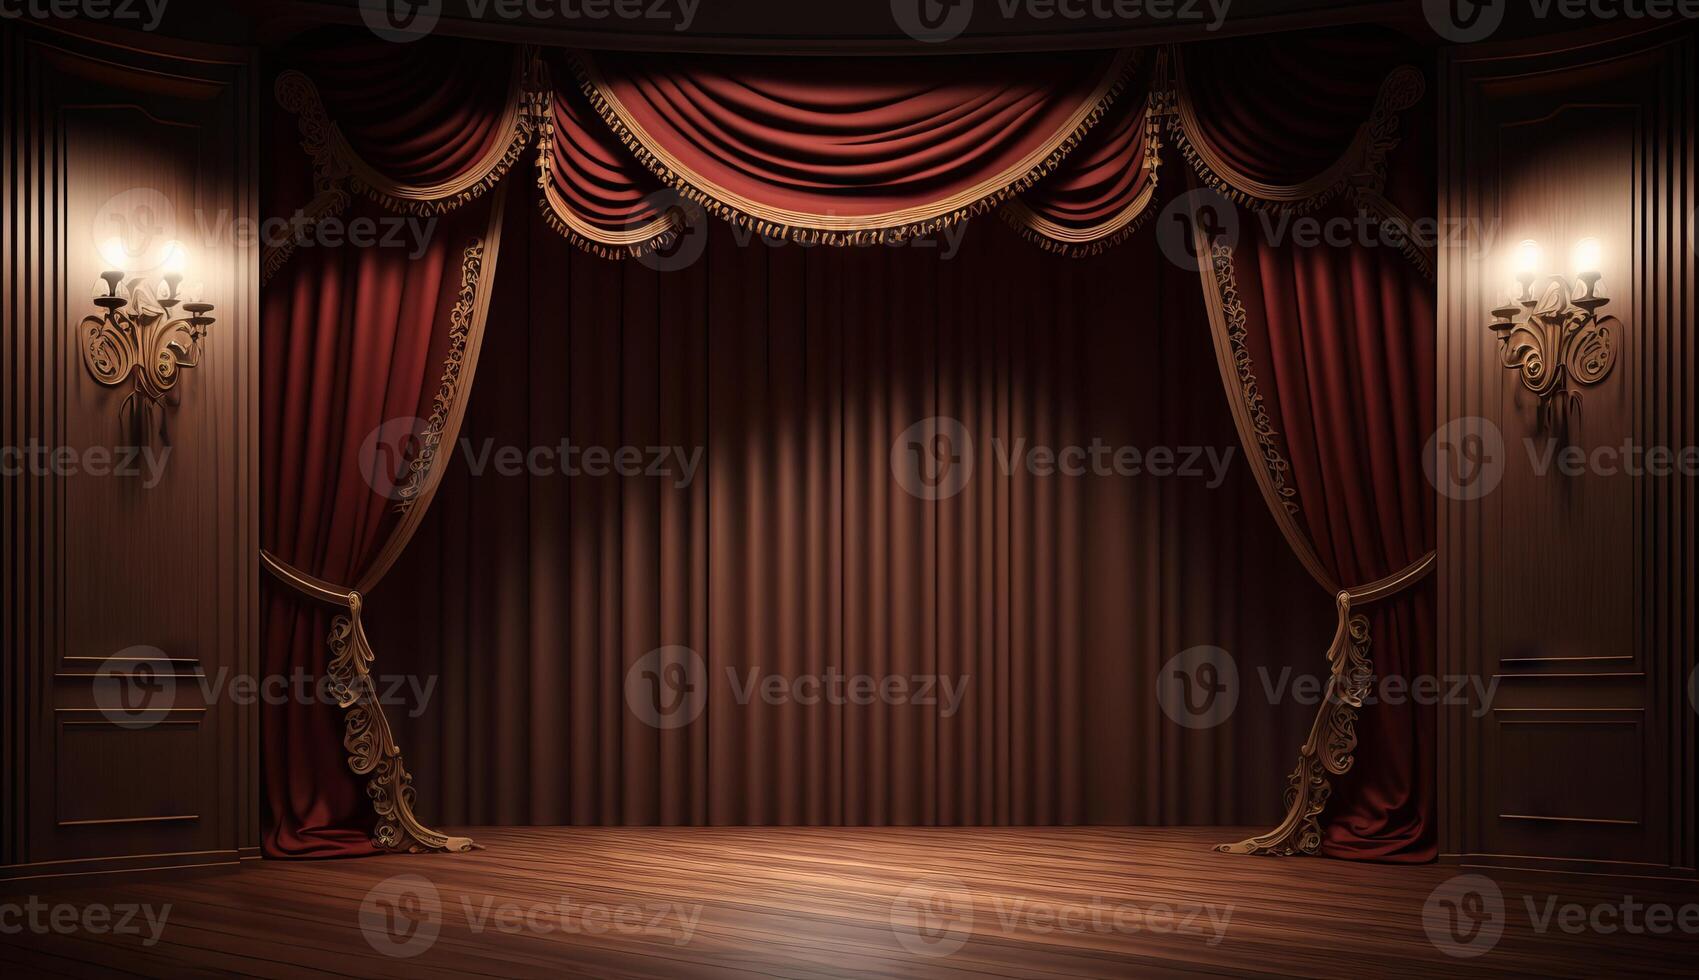 classic maroon curtains with light descended onto the center of the stage. photo